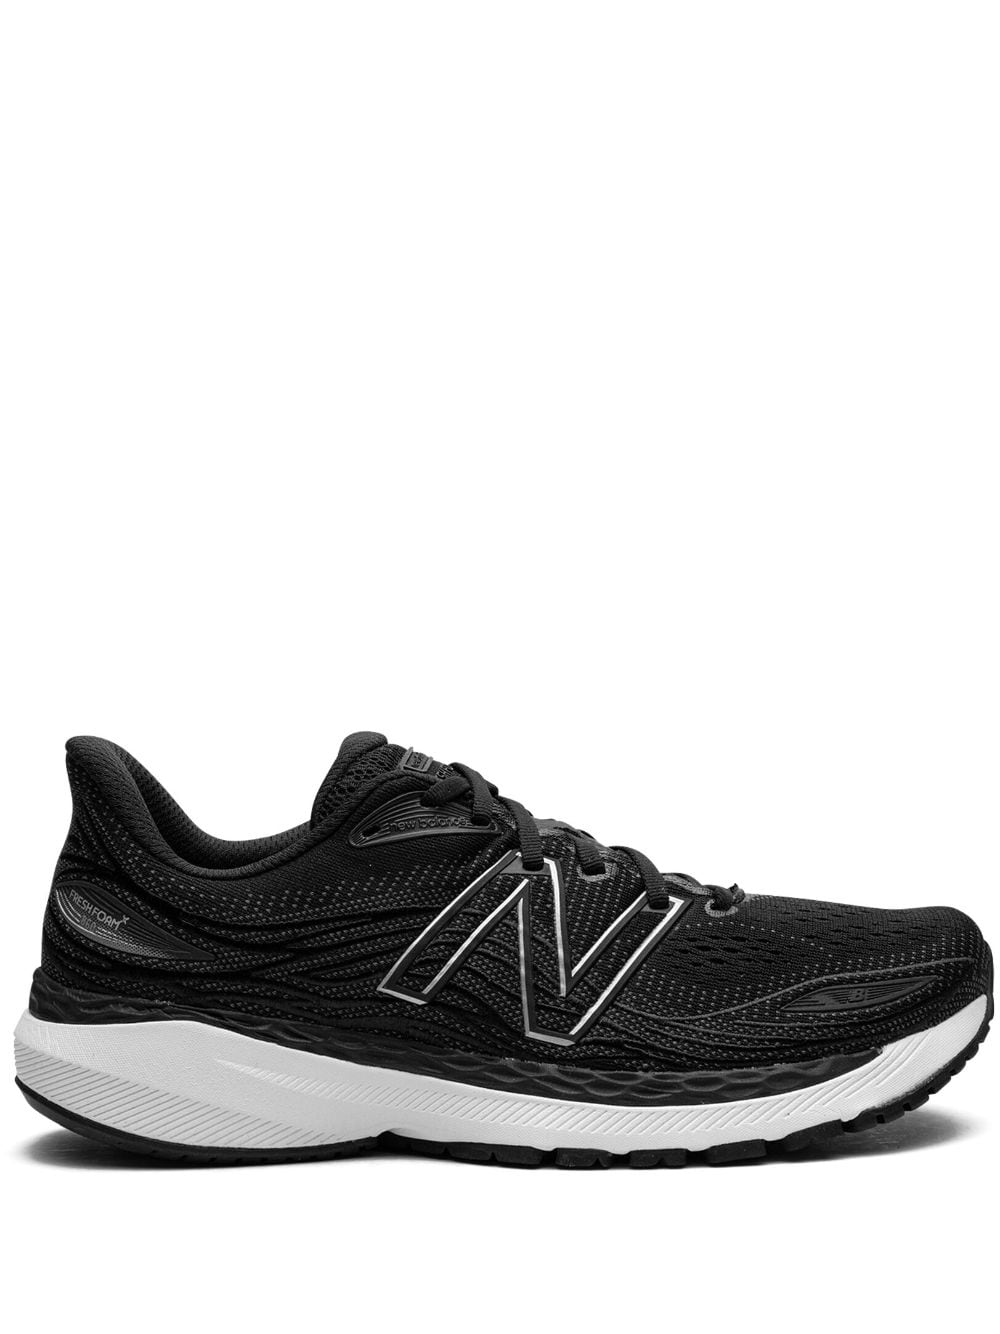 New Balance 860 "Black/Silver" sneakers